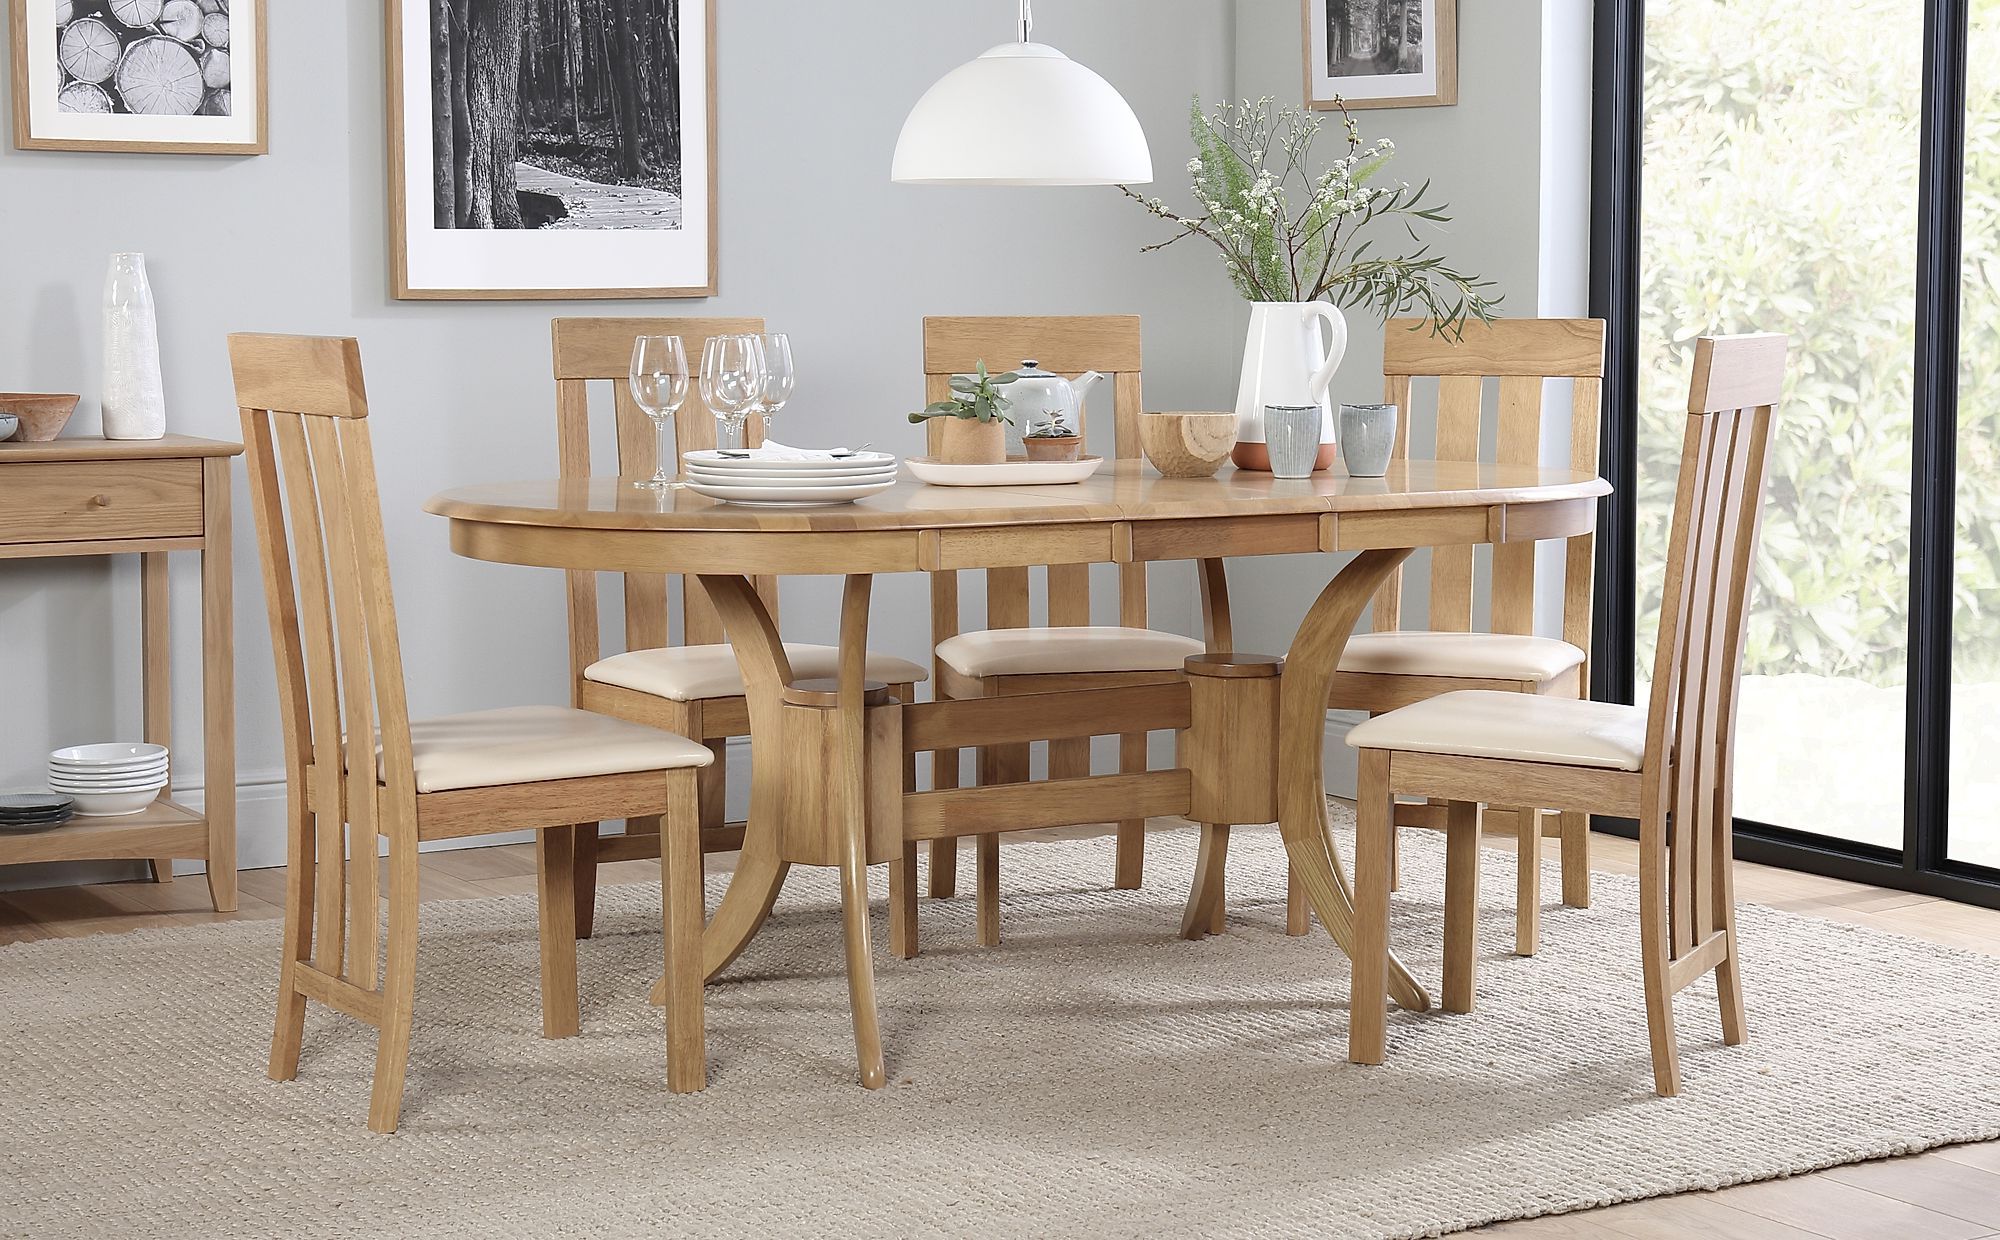 Townhouse Oval Oak Extending Dining Table With 4 Chester Chairs (ivory Within Well Liked Extendable Oval Dining Sets (View 6 of 15)